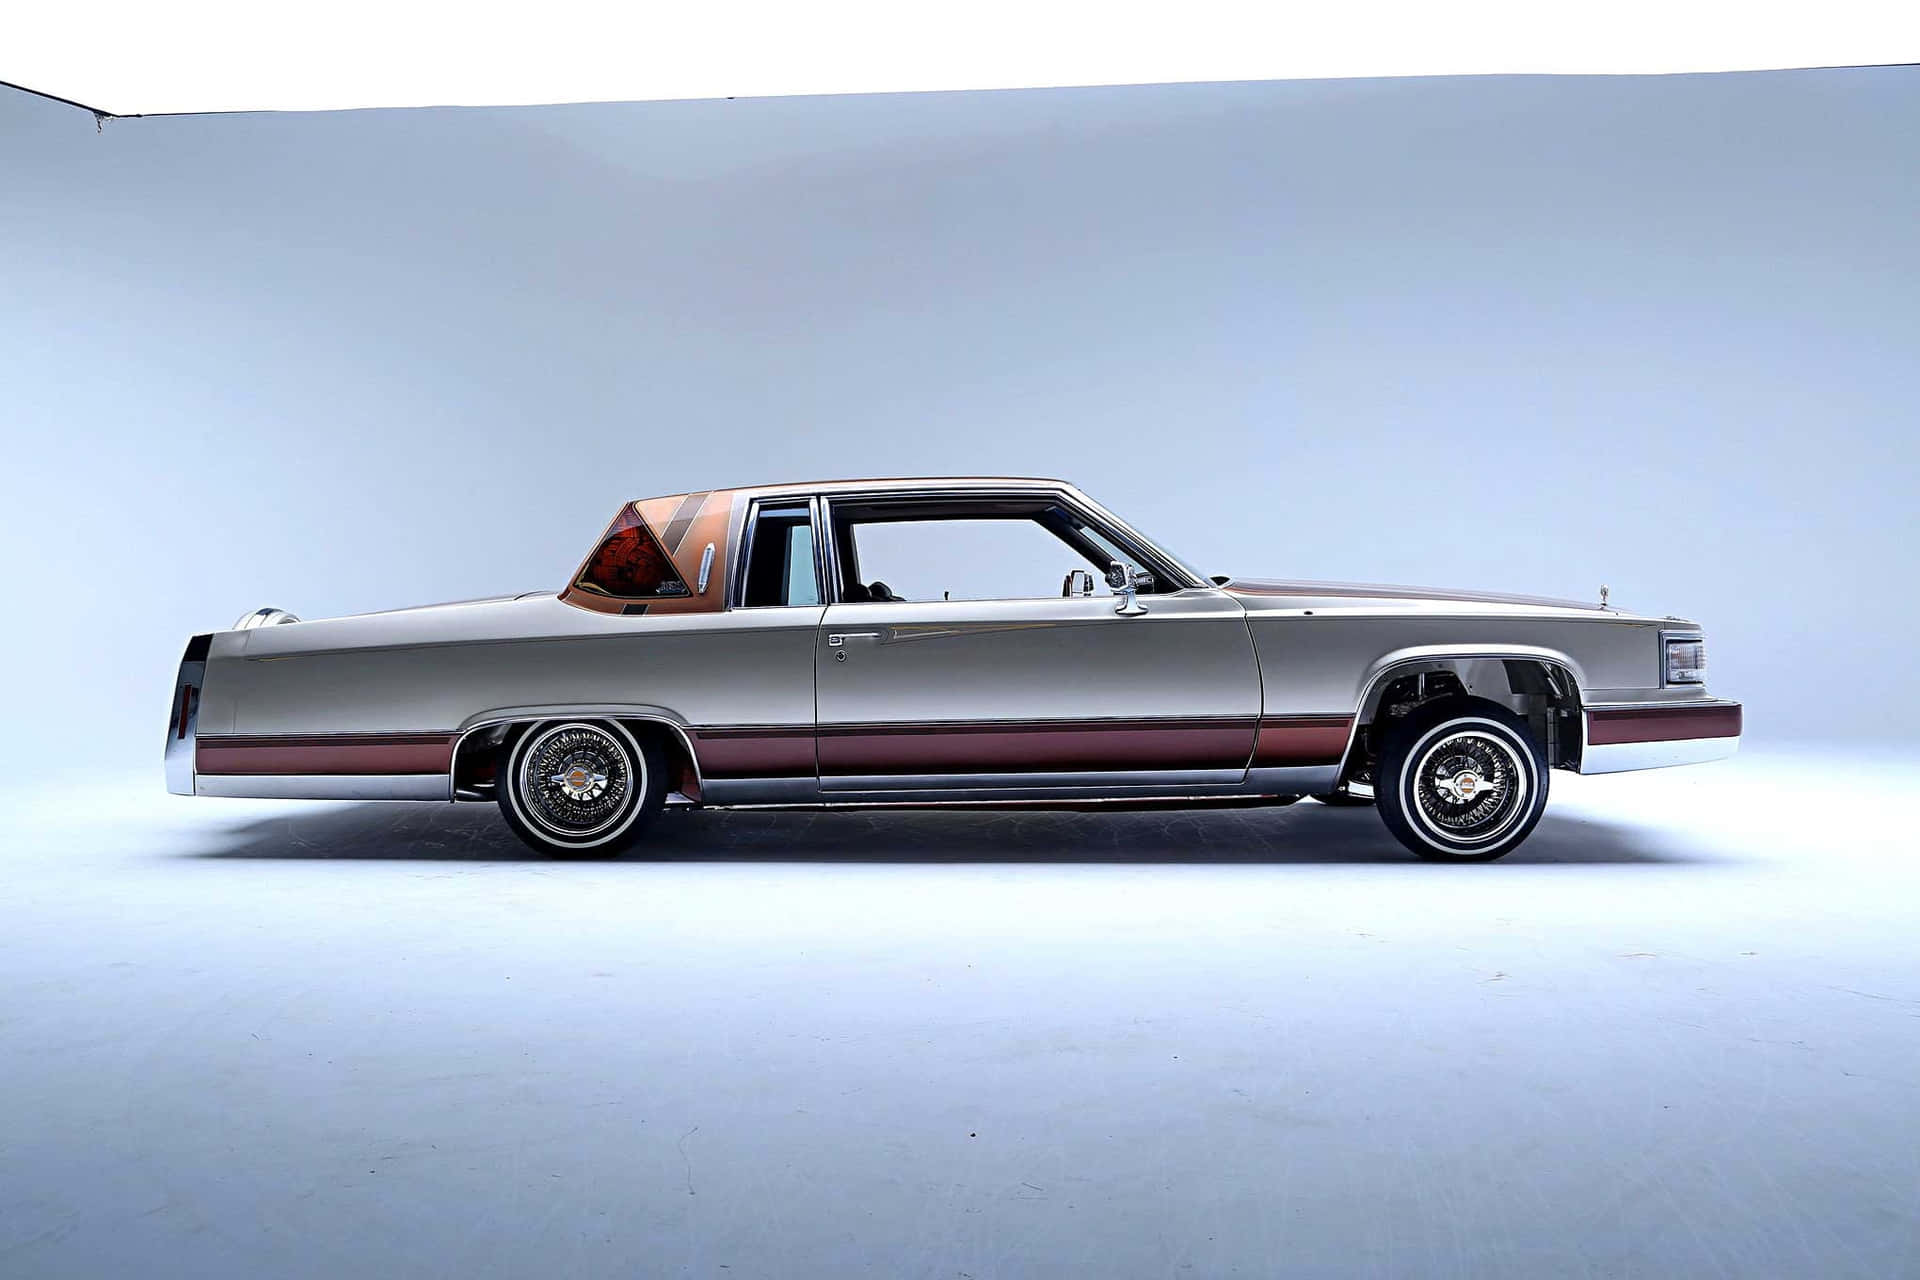 Majestic Cadillac Deville in its Glory Wallpaper